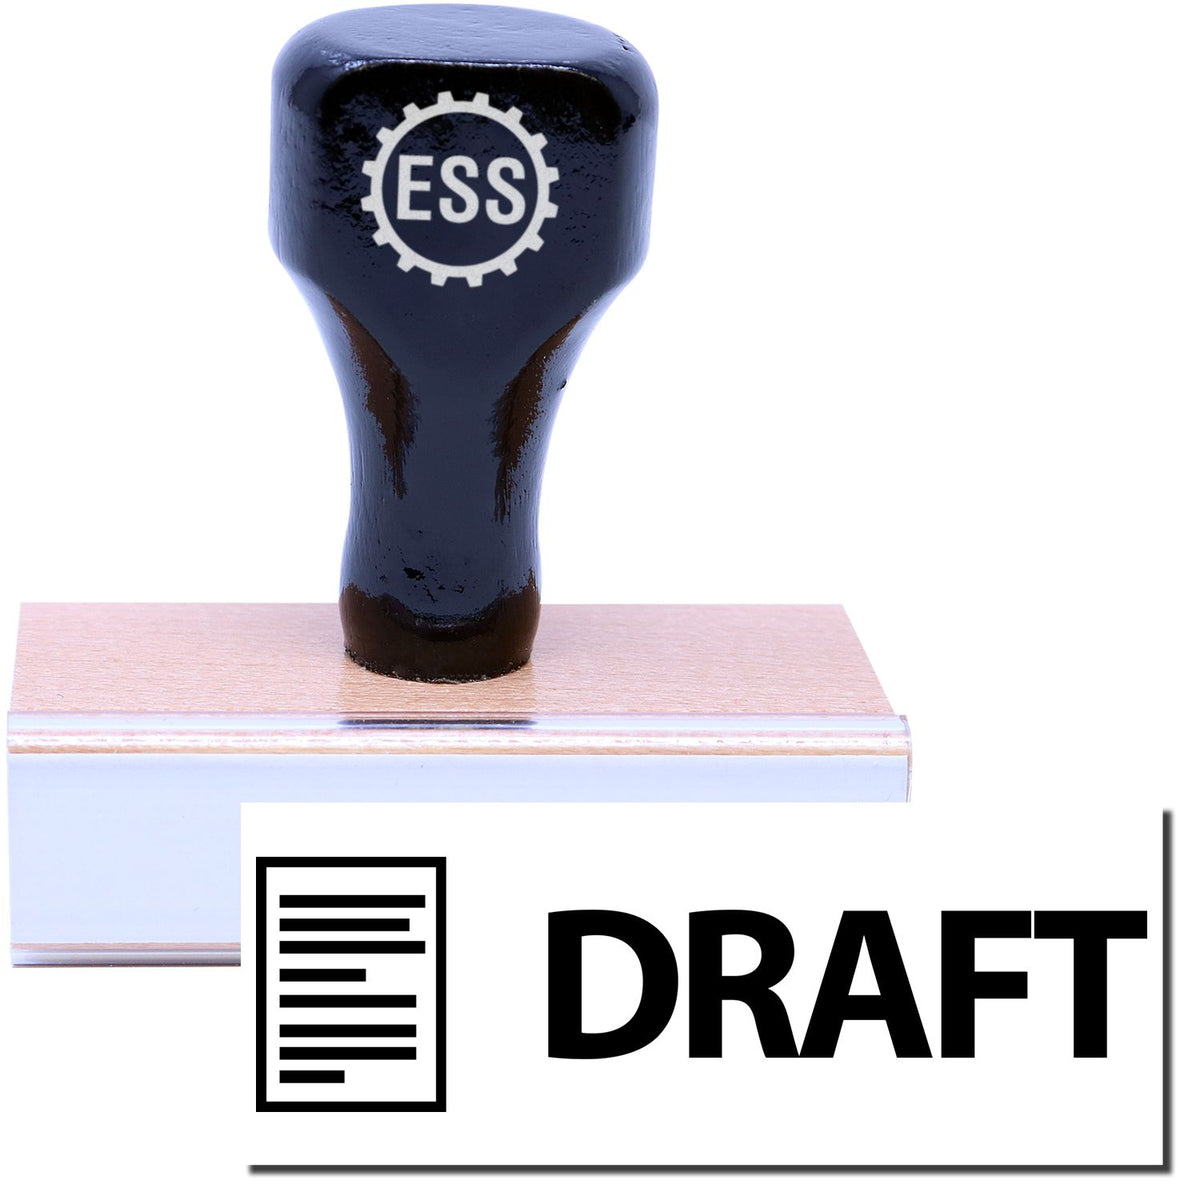 A stock office rubber stamp with a stamped image showing how the text &quot;DRAFT&quot; in a large eye-catching font with an image of a letter on the left side is displayed after stamping.